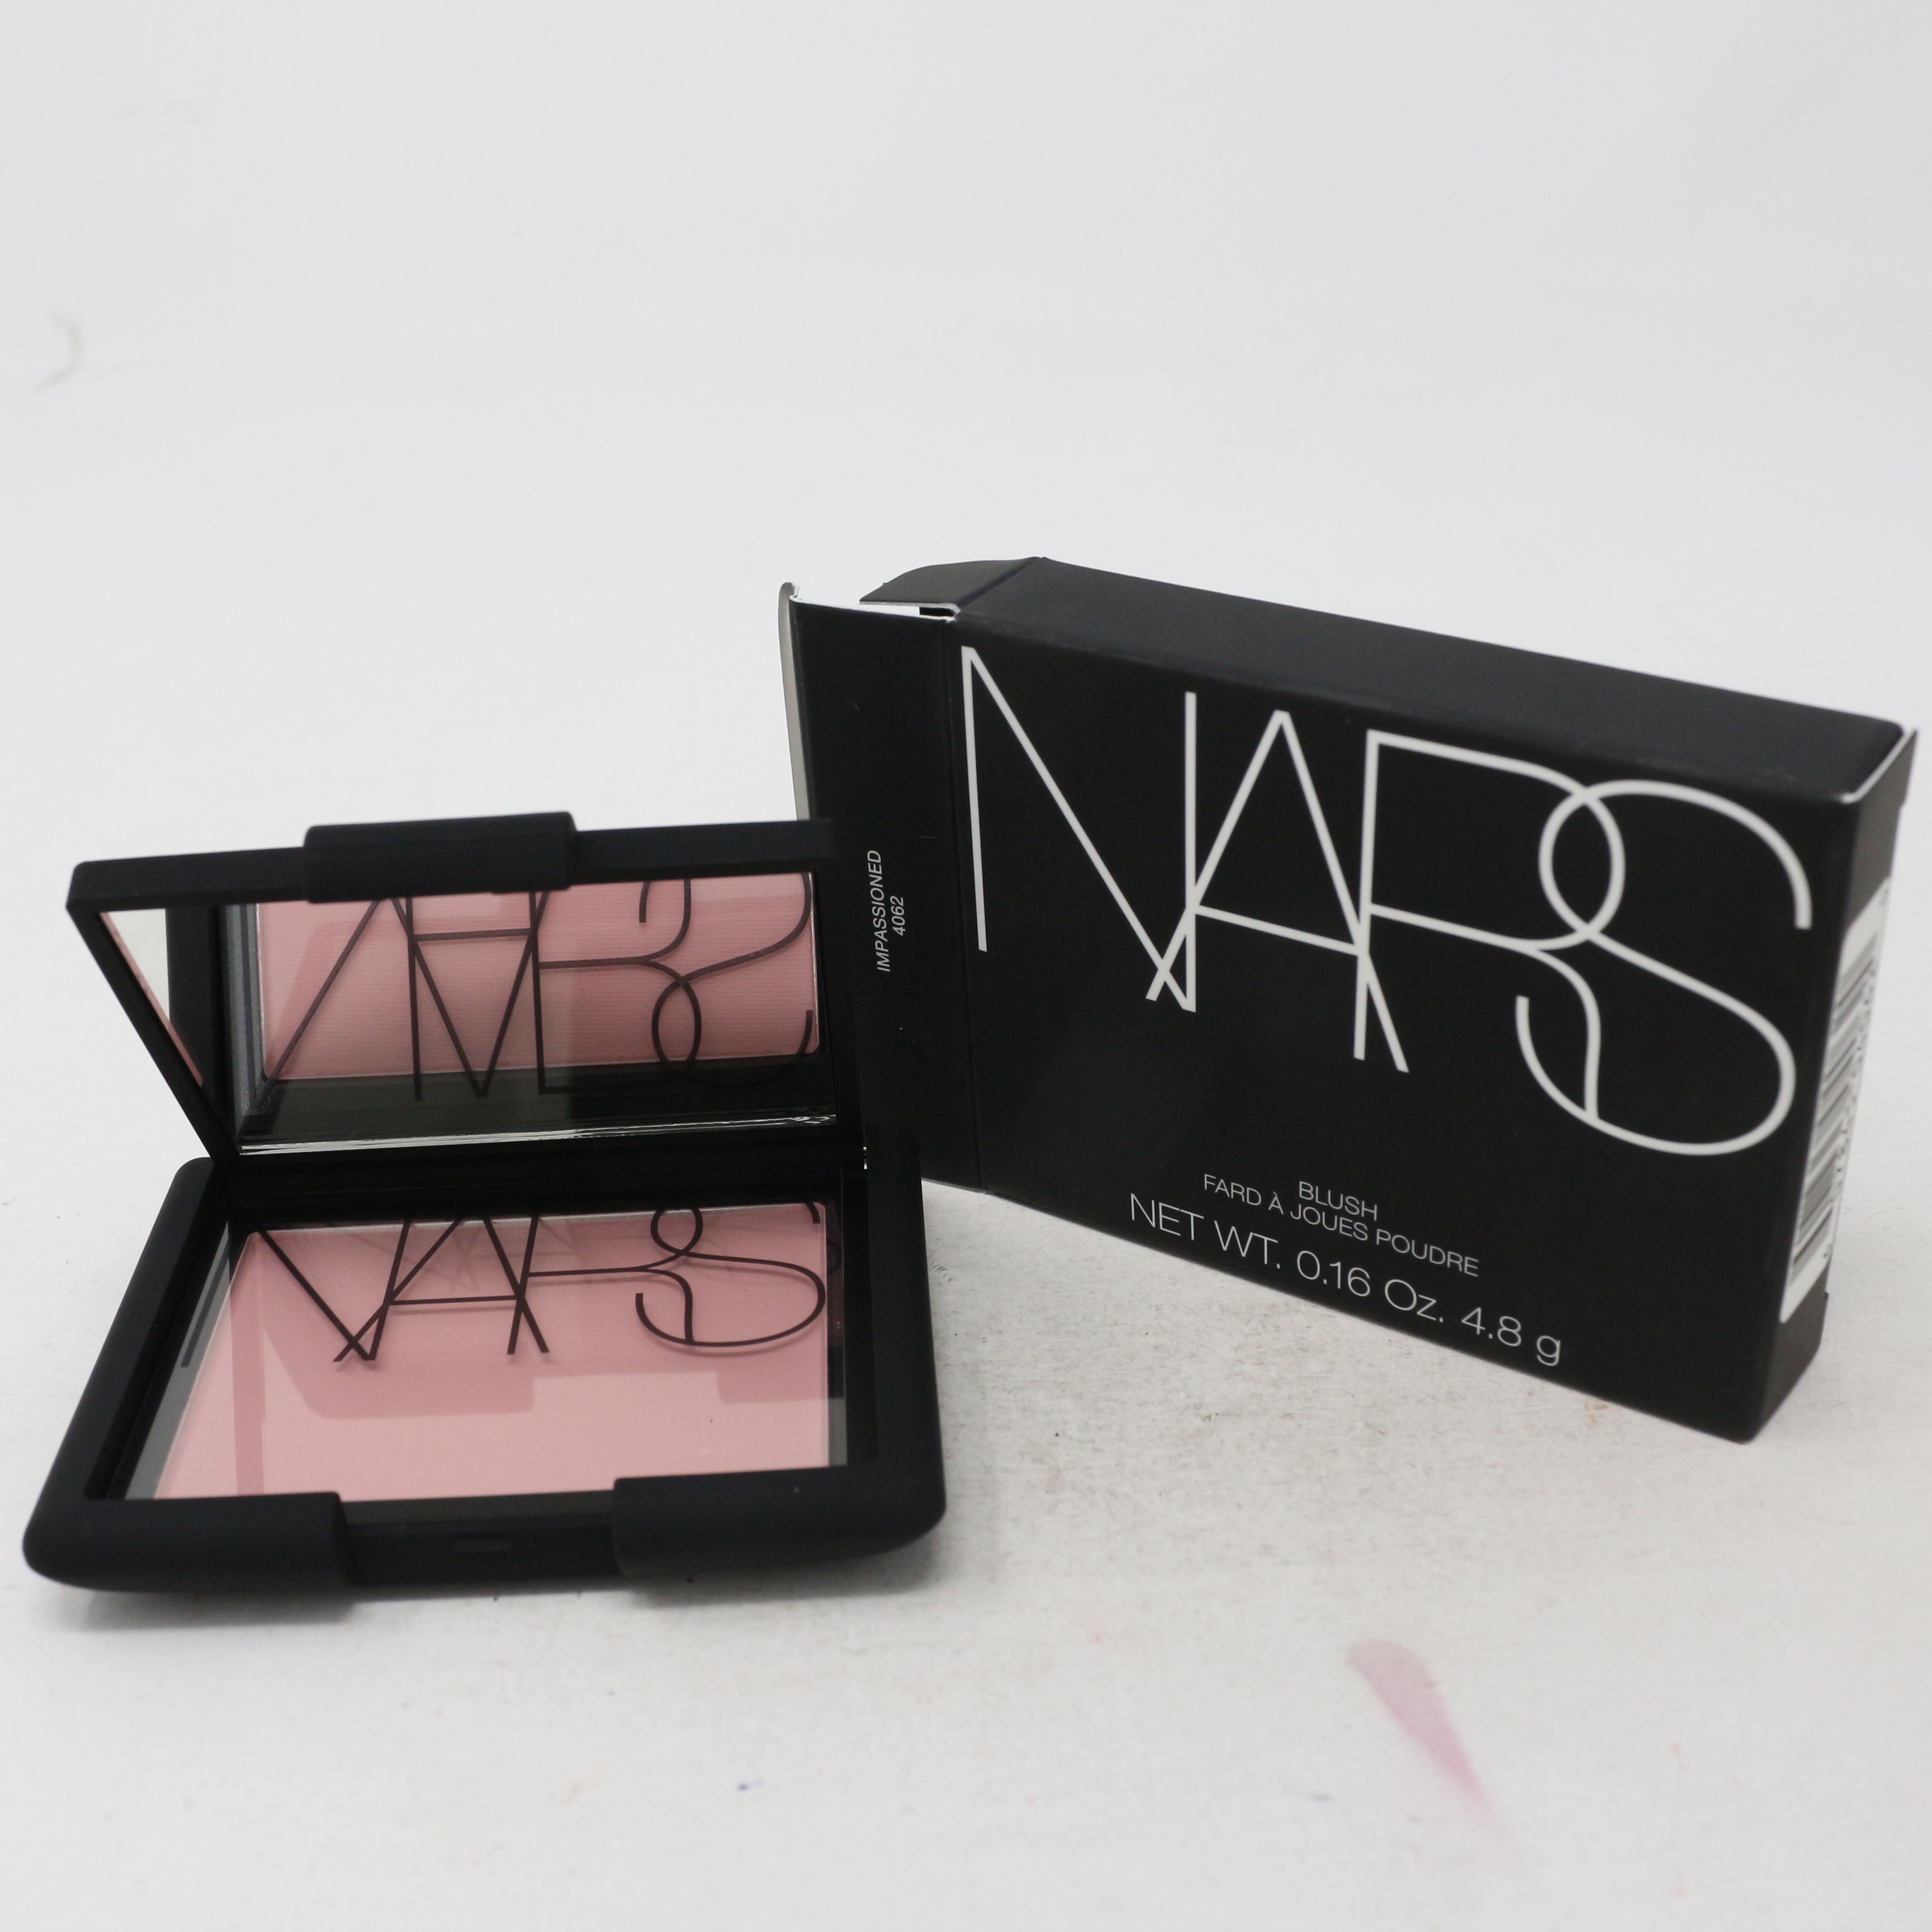  NARS Blush, Blissful, 0.16 Ounce : Beauty & Personal Care